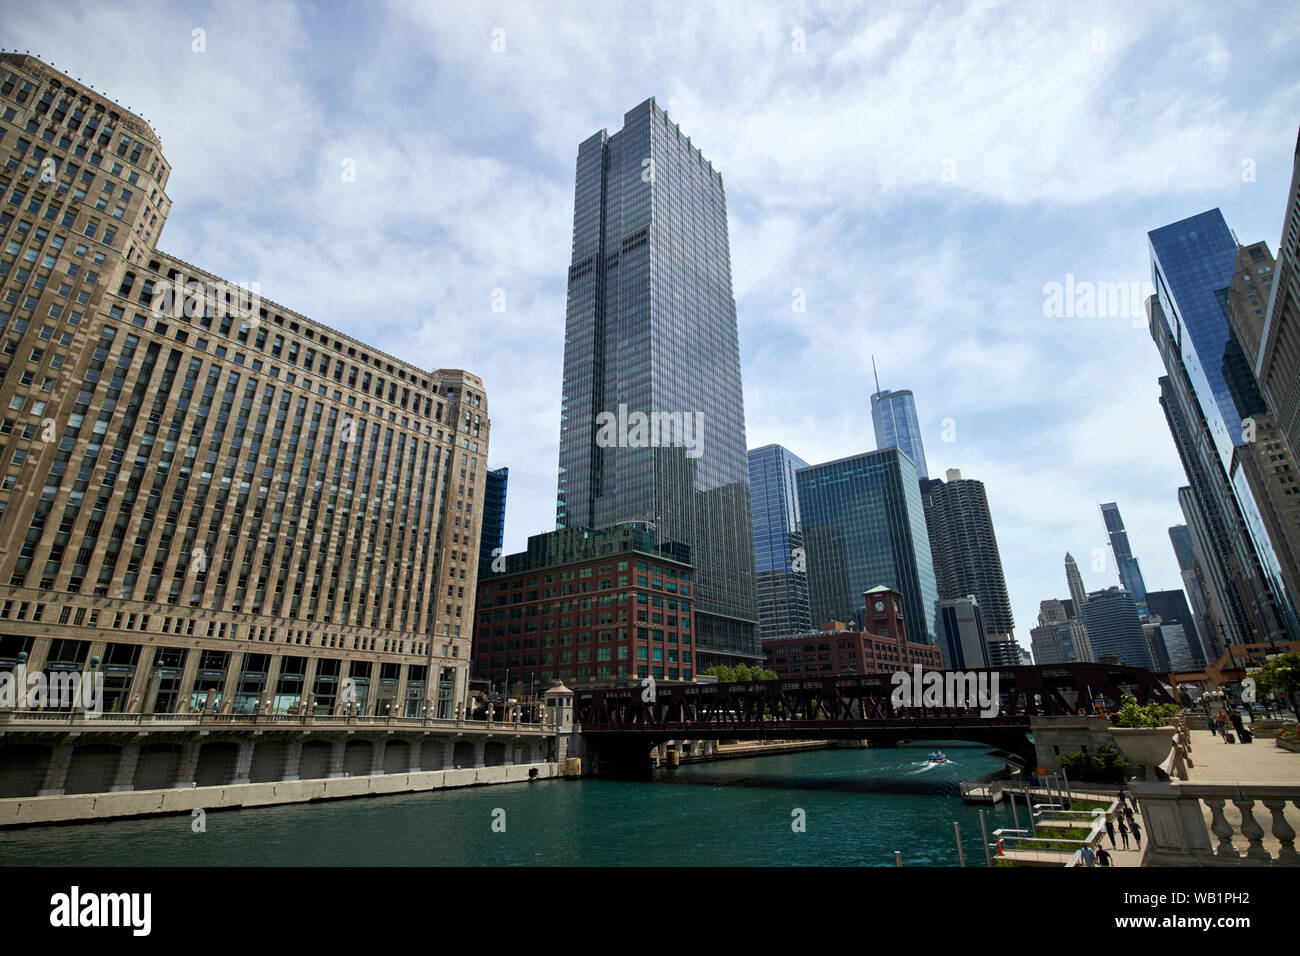 view of the wells street bridge over the chicago river merchandise mart and 300 north lasalle skyscraperchicago illinois united states of america Stock Photo